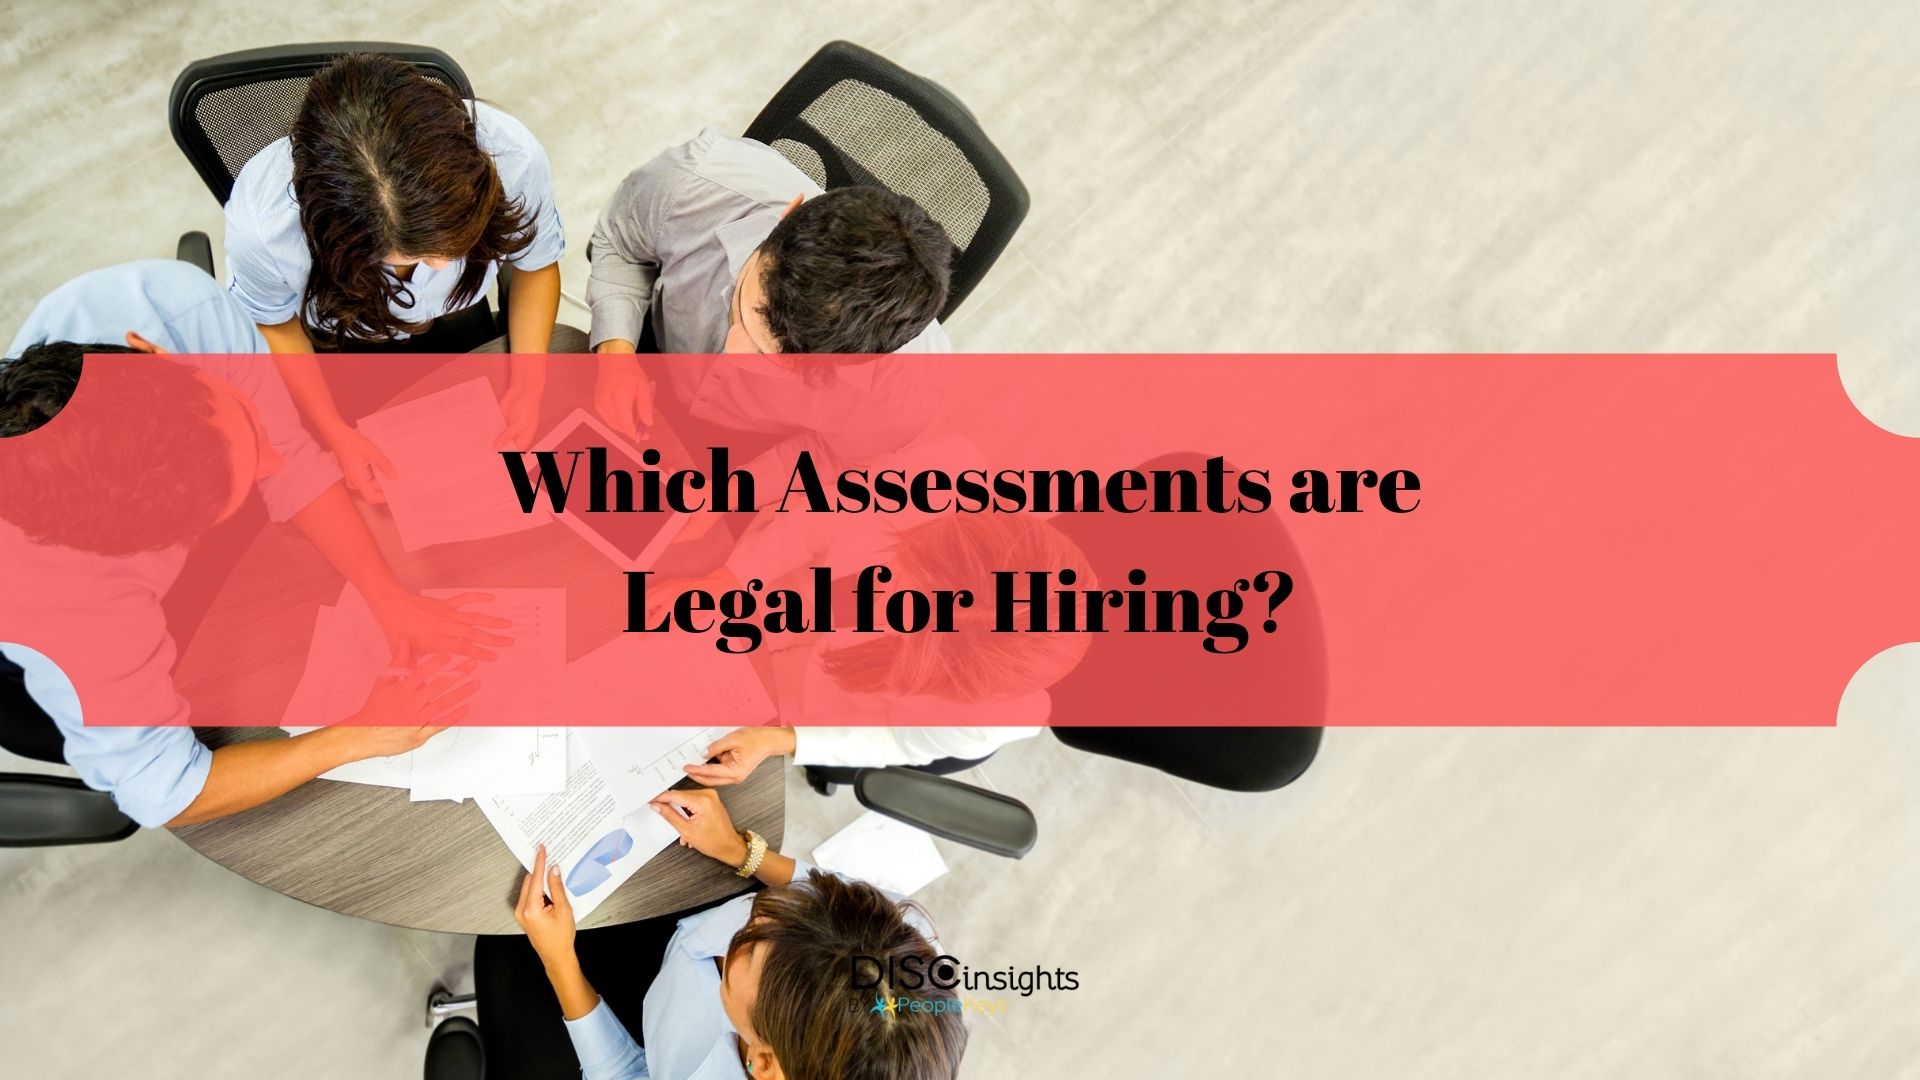 Which assessments are legal for hiring?